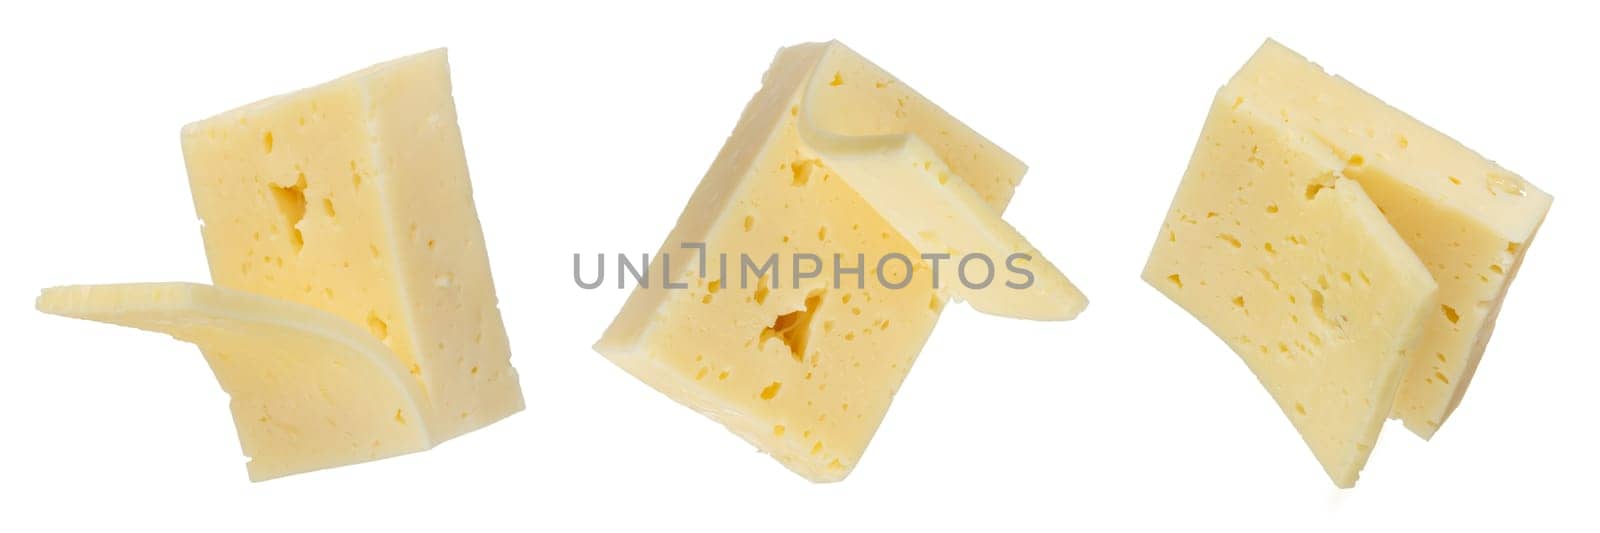 A set of large pieces of cheese with a cut slice on a white background. Cheese for pizza. Sliced piece of cheese on a white background close-up. Insert into a design or project